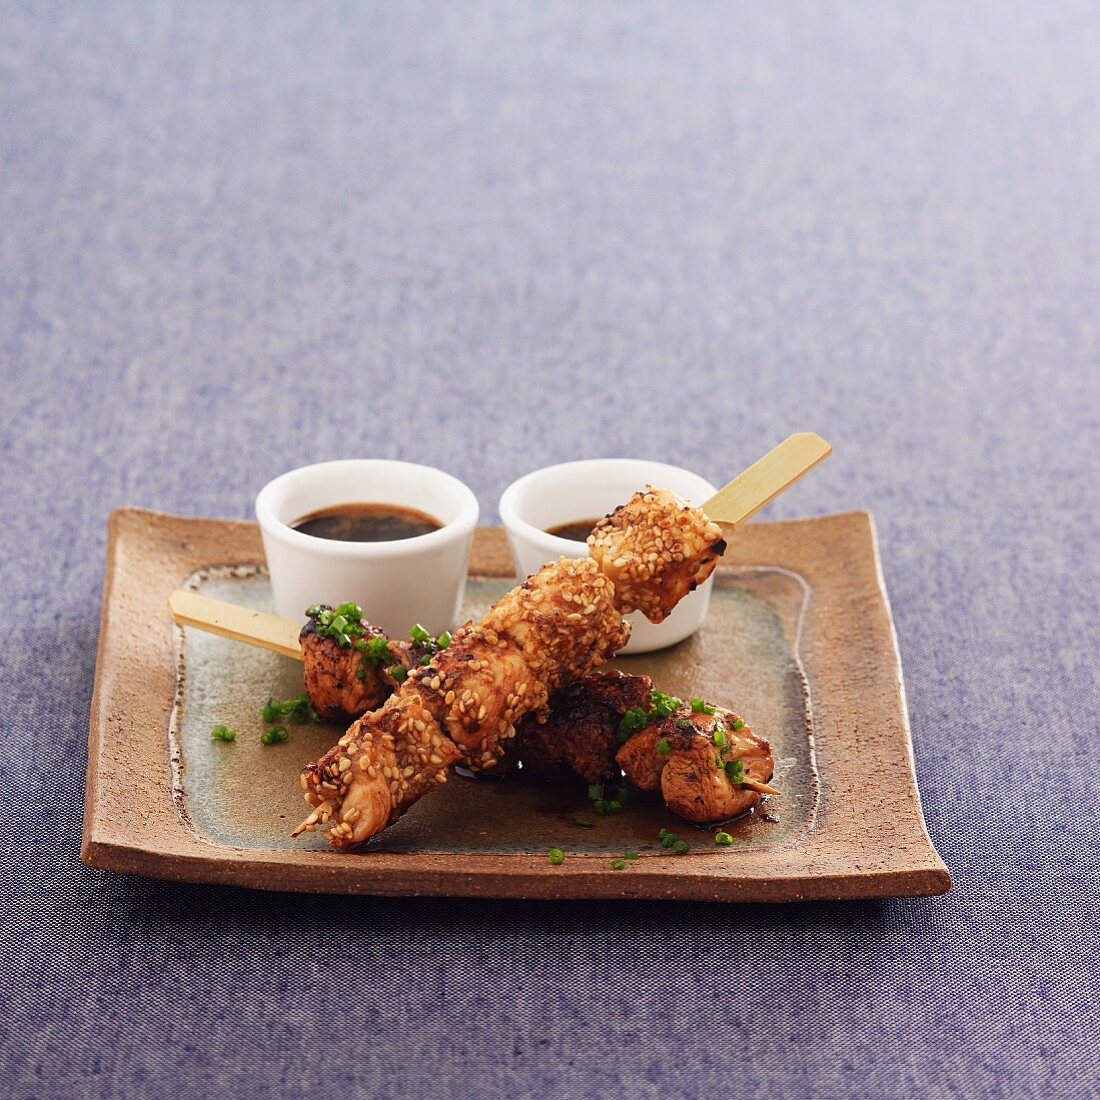 Chicken skewers with sesame seeds, and turkey skewers with chives